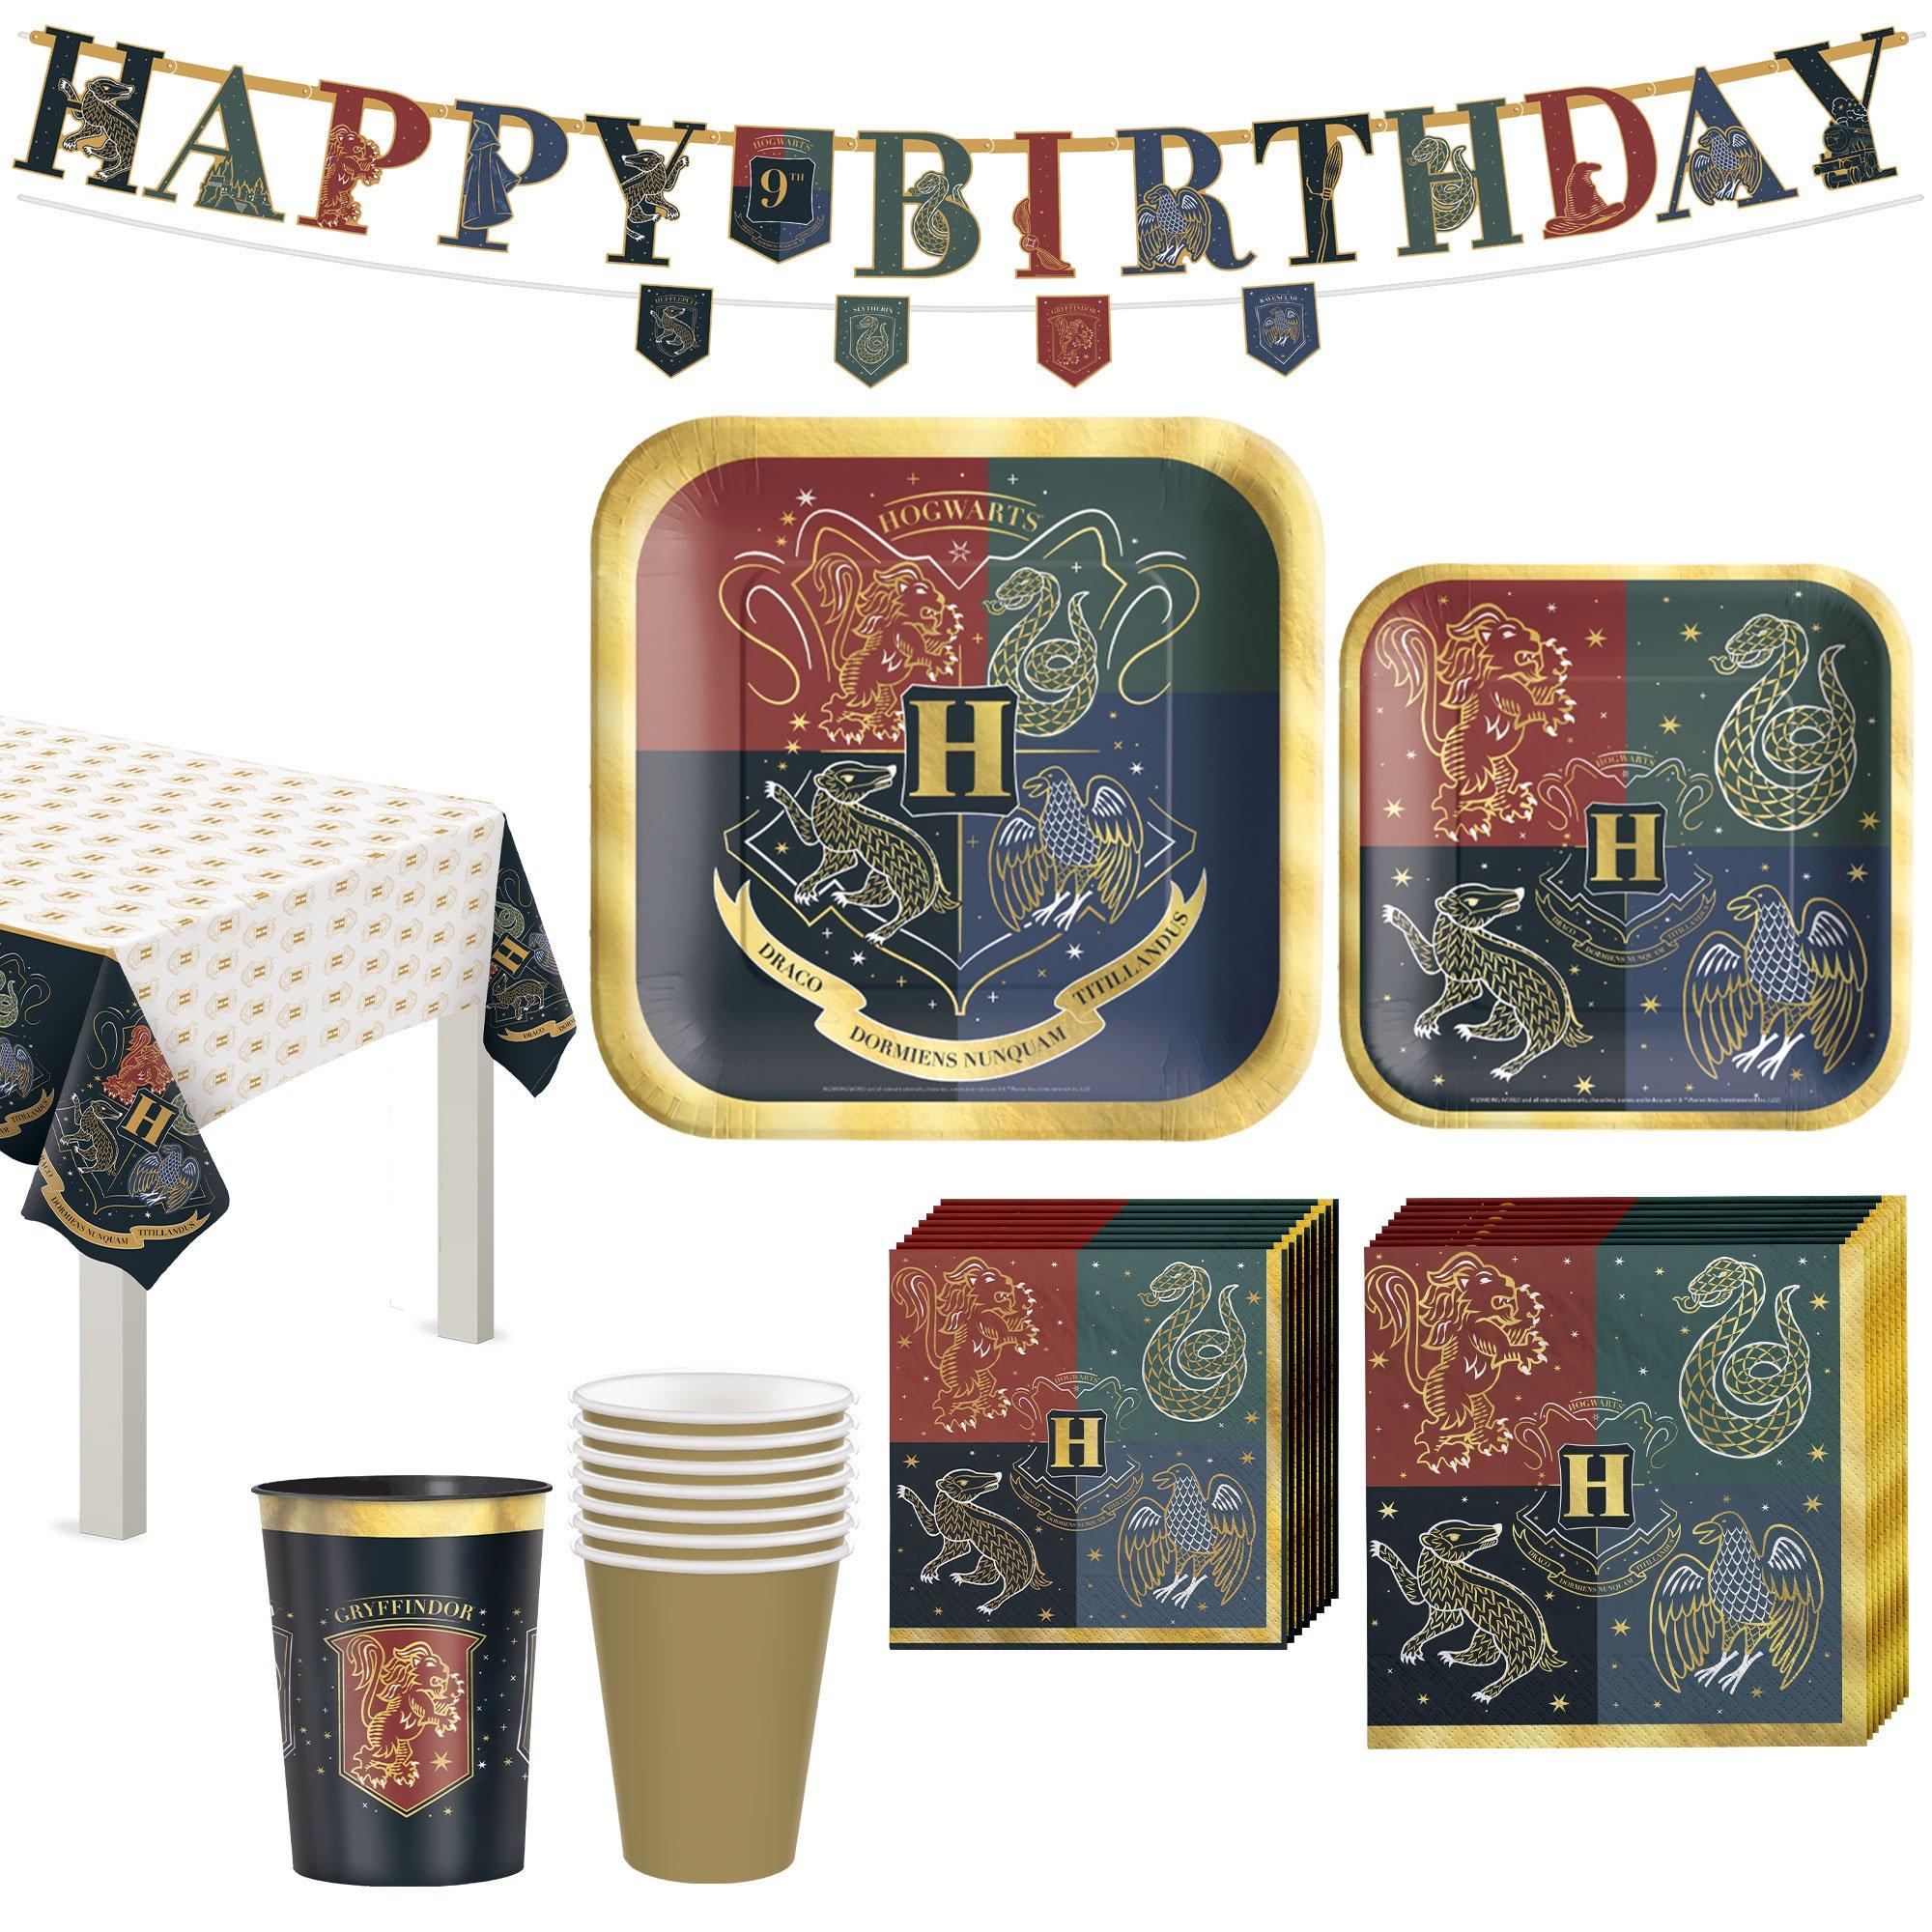 Herofiber Harry Potter Themed Party Supplies, Decorations & Favors - 16 Guest - Small & Large Plates, Cups, Napkins, Tablecover, Cutlery, Loot